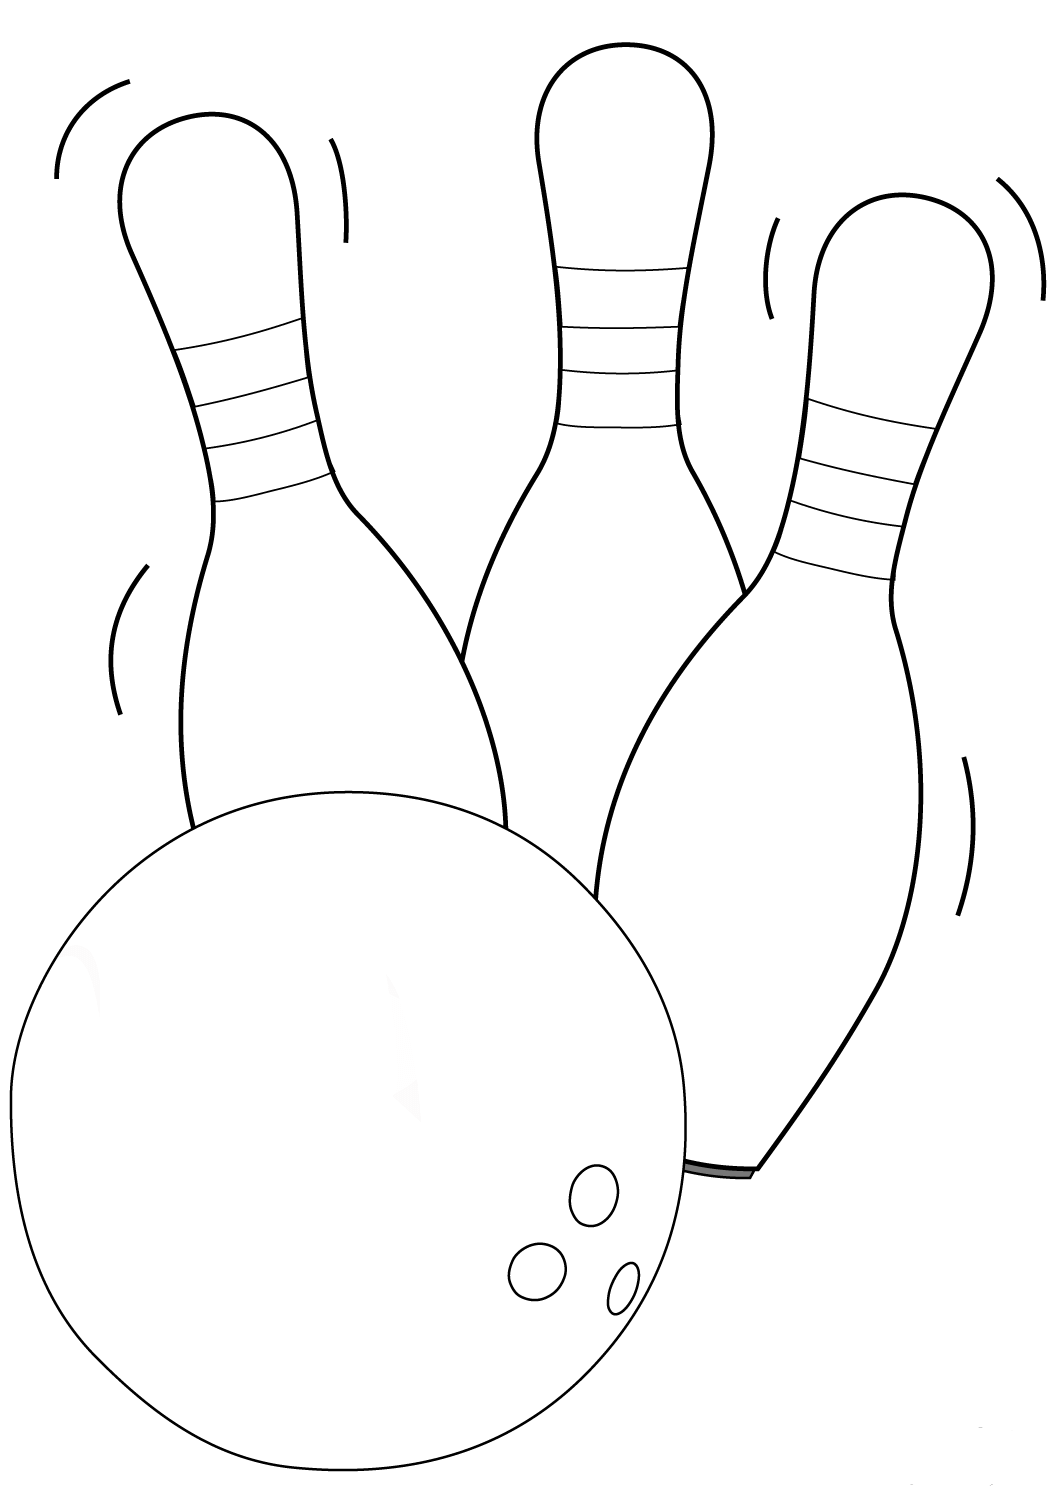 printable bowling coloring pages